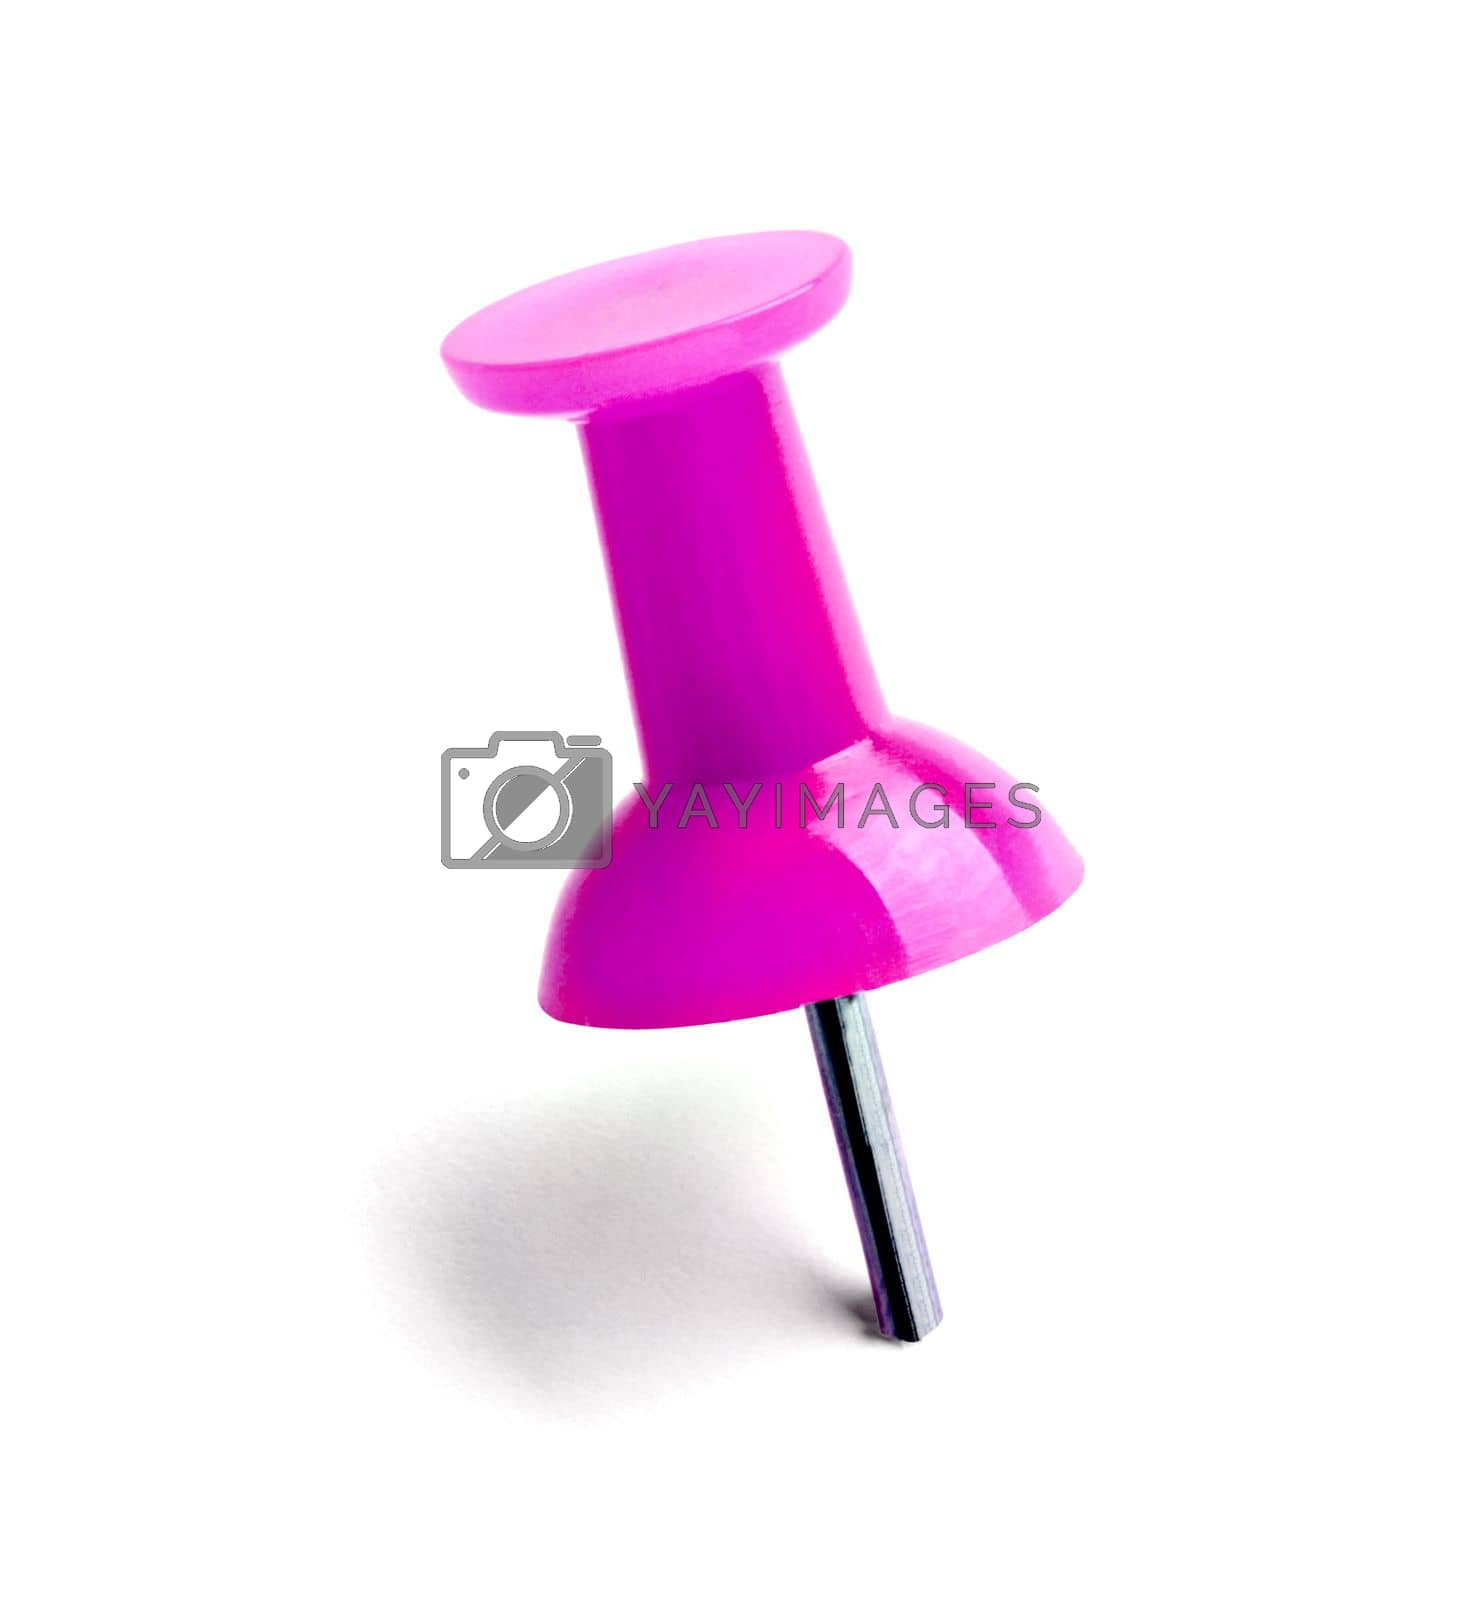 Royalty free image of push pin paper clip thumbtack note office by Picsfive